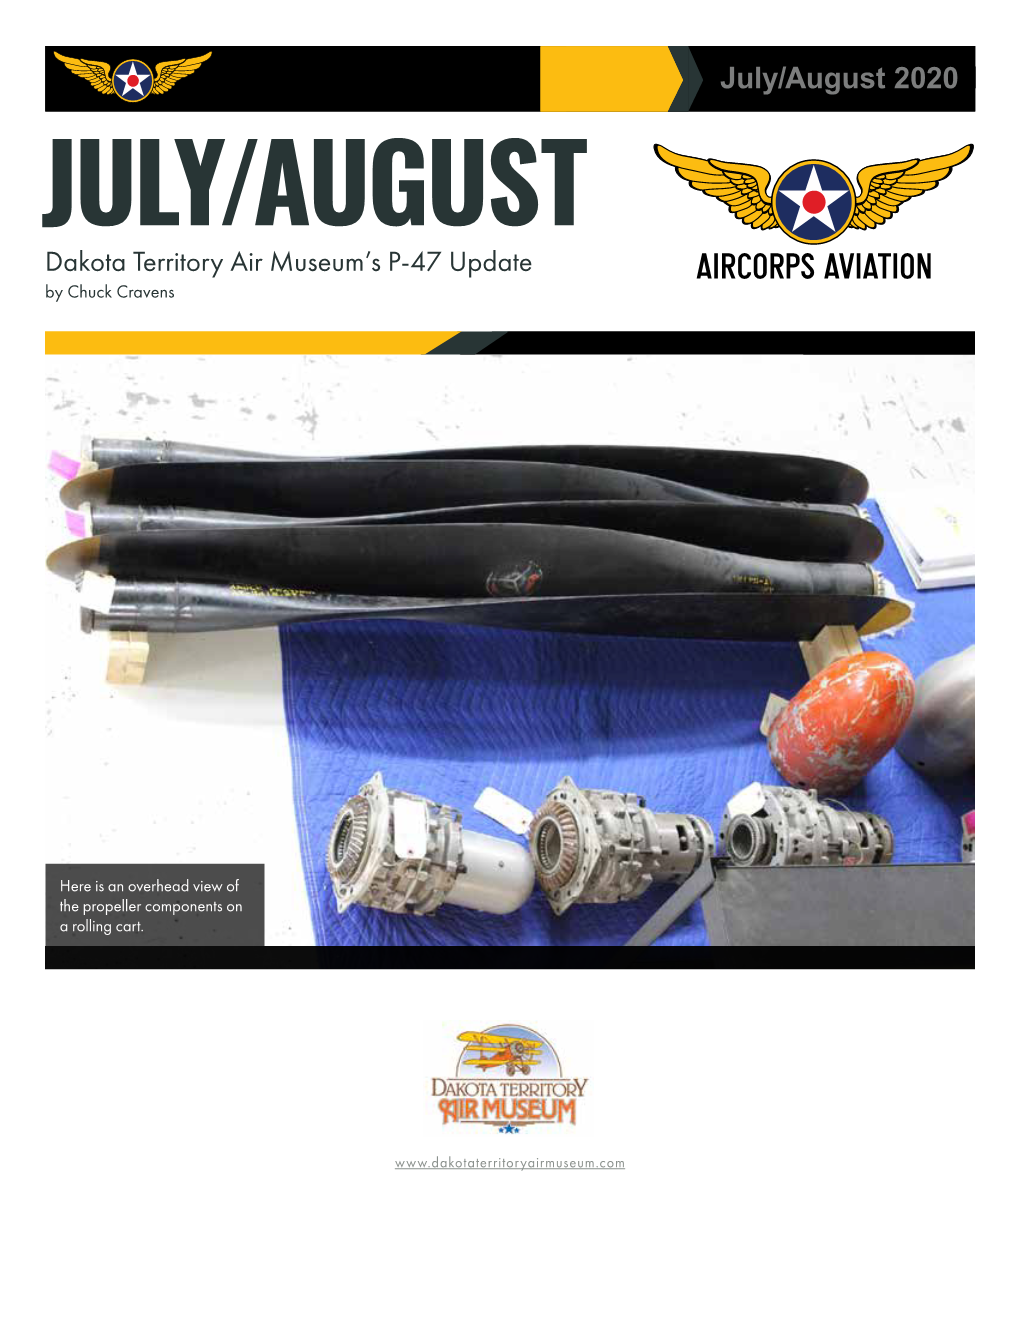 July/August 2020 JULY/AUGUST Dakota Territory Air Museum’S P-47 Update by Chuck Cravens